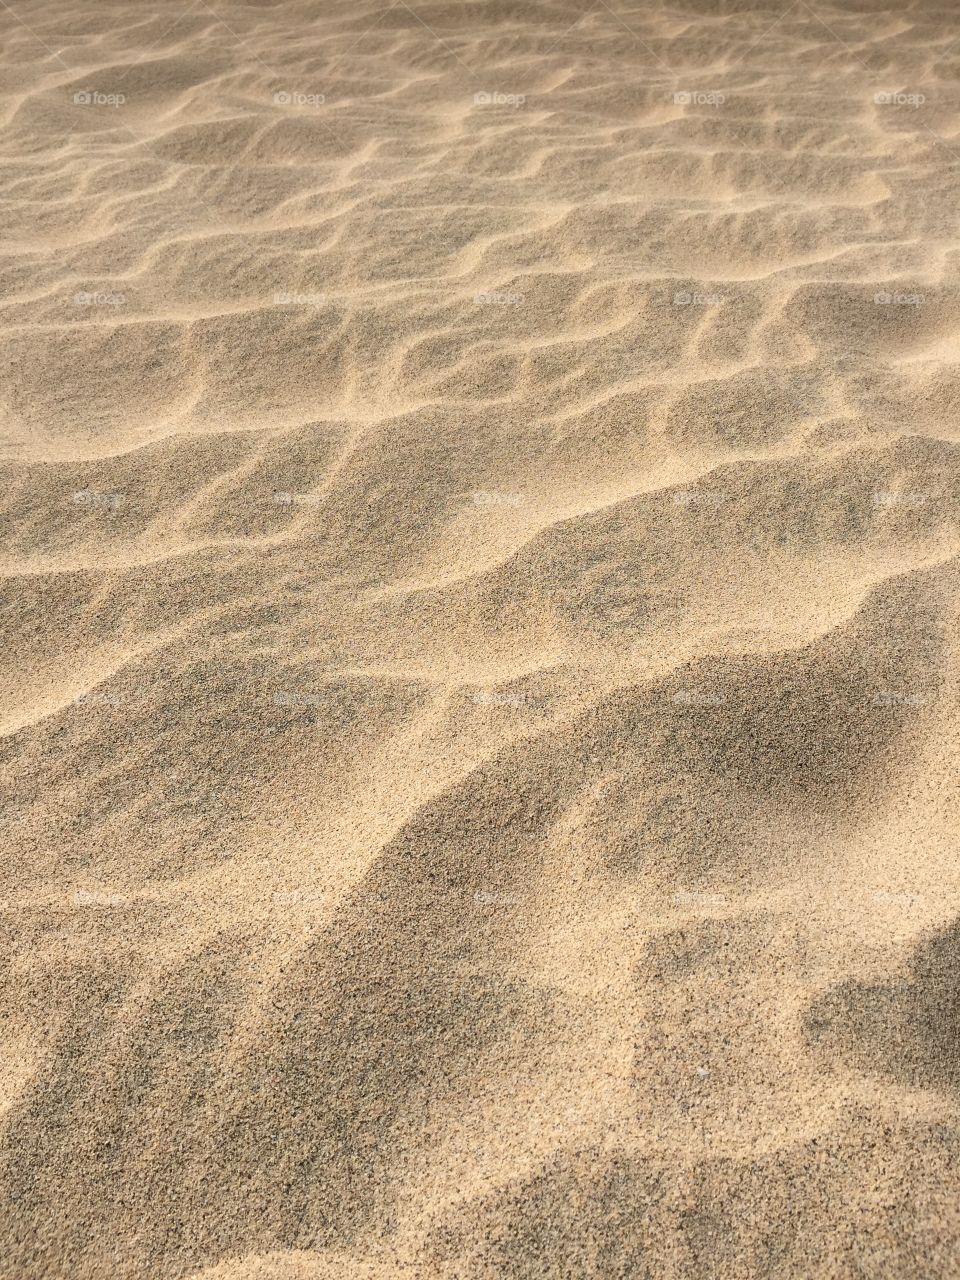 Sand in Cape Verde